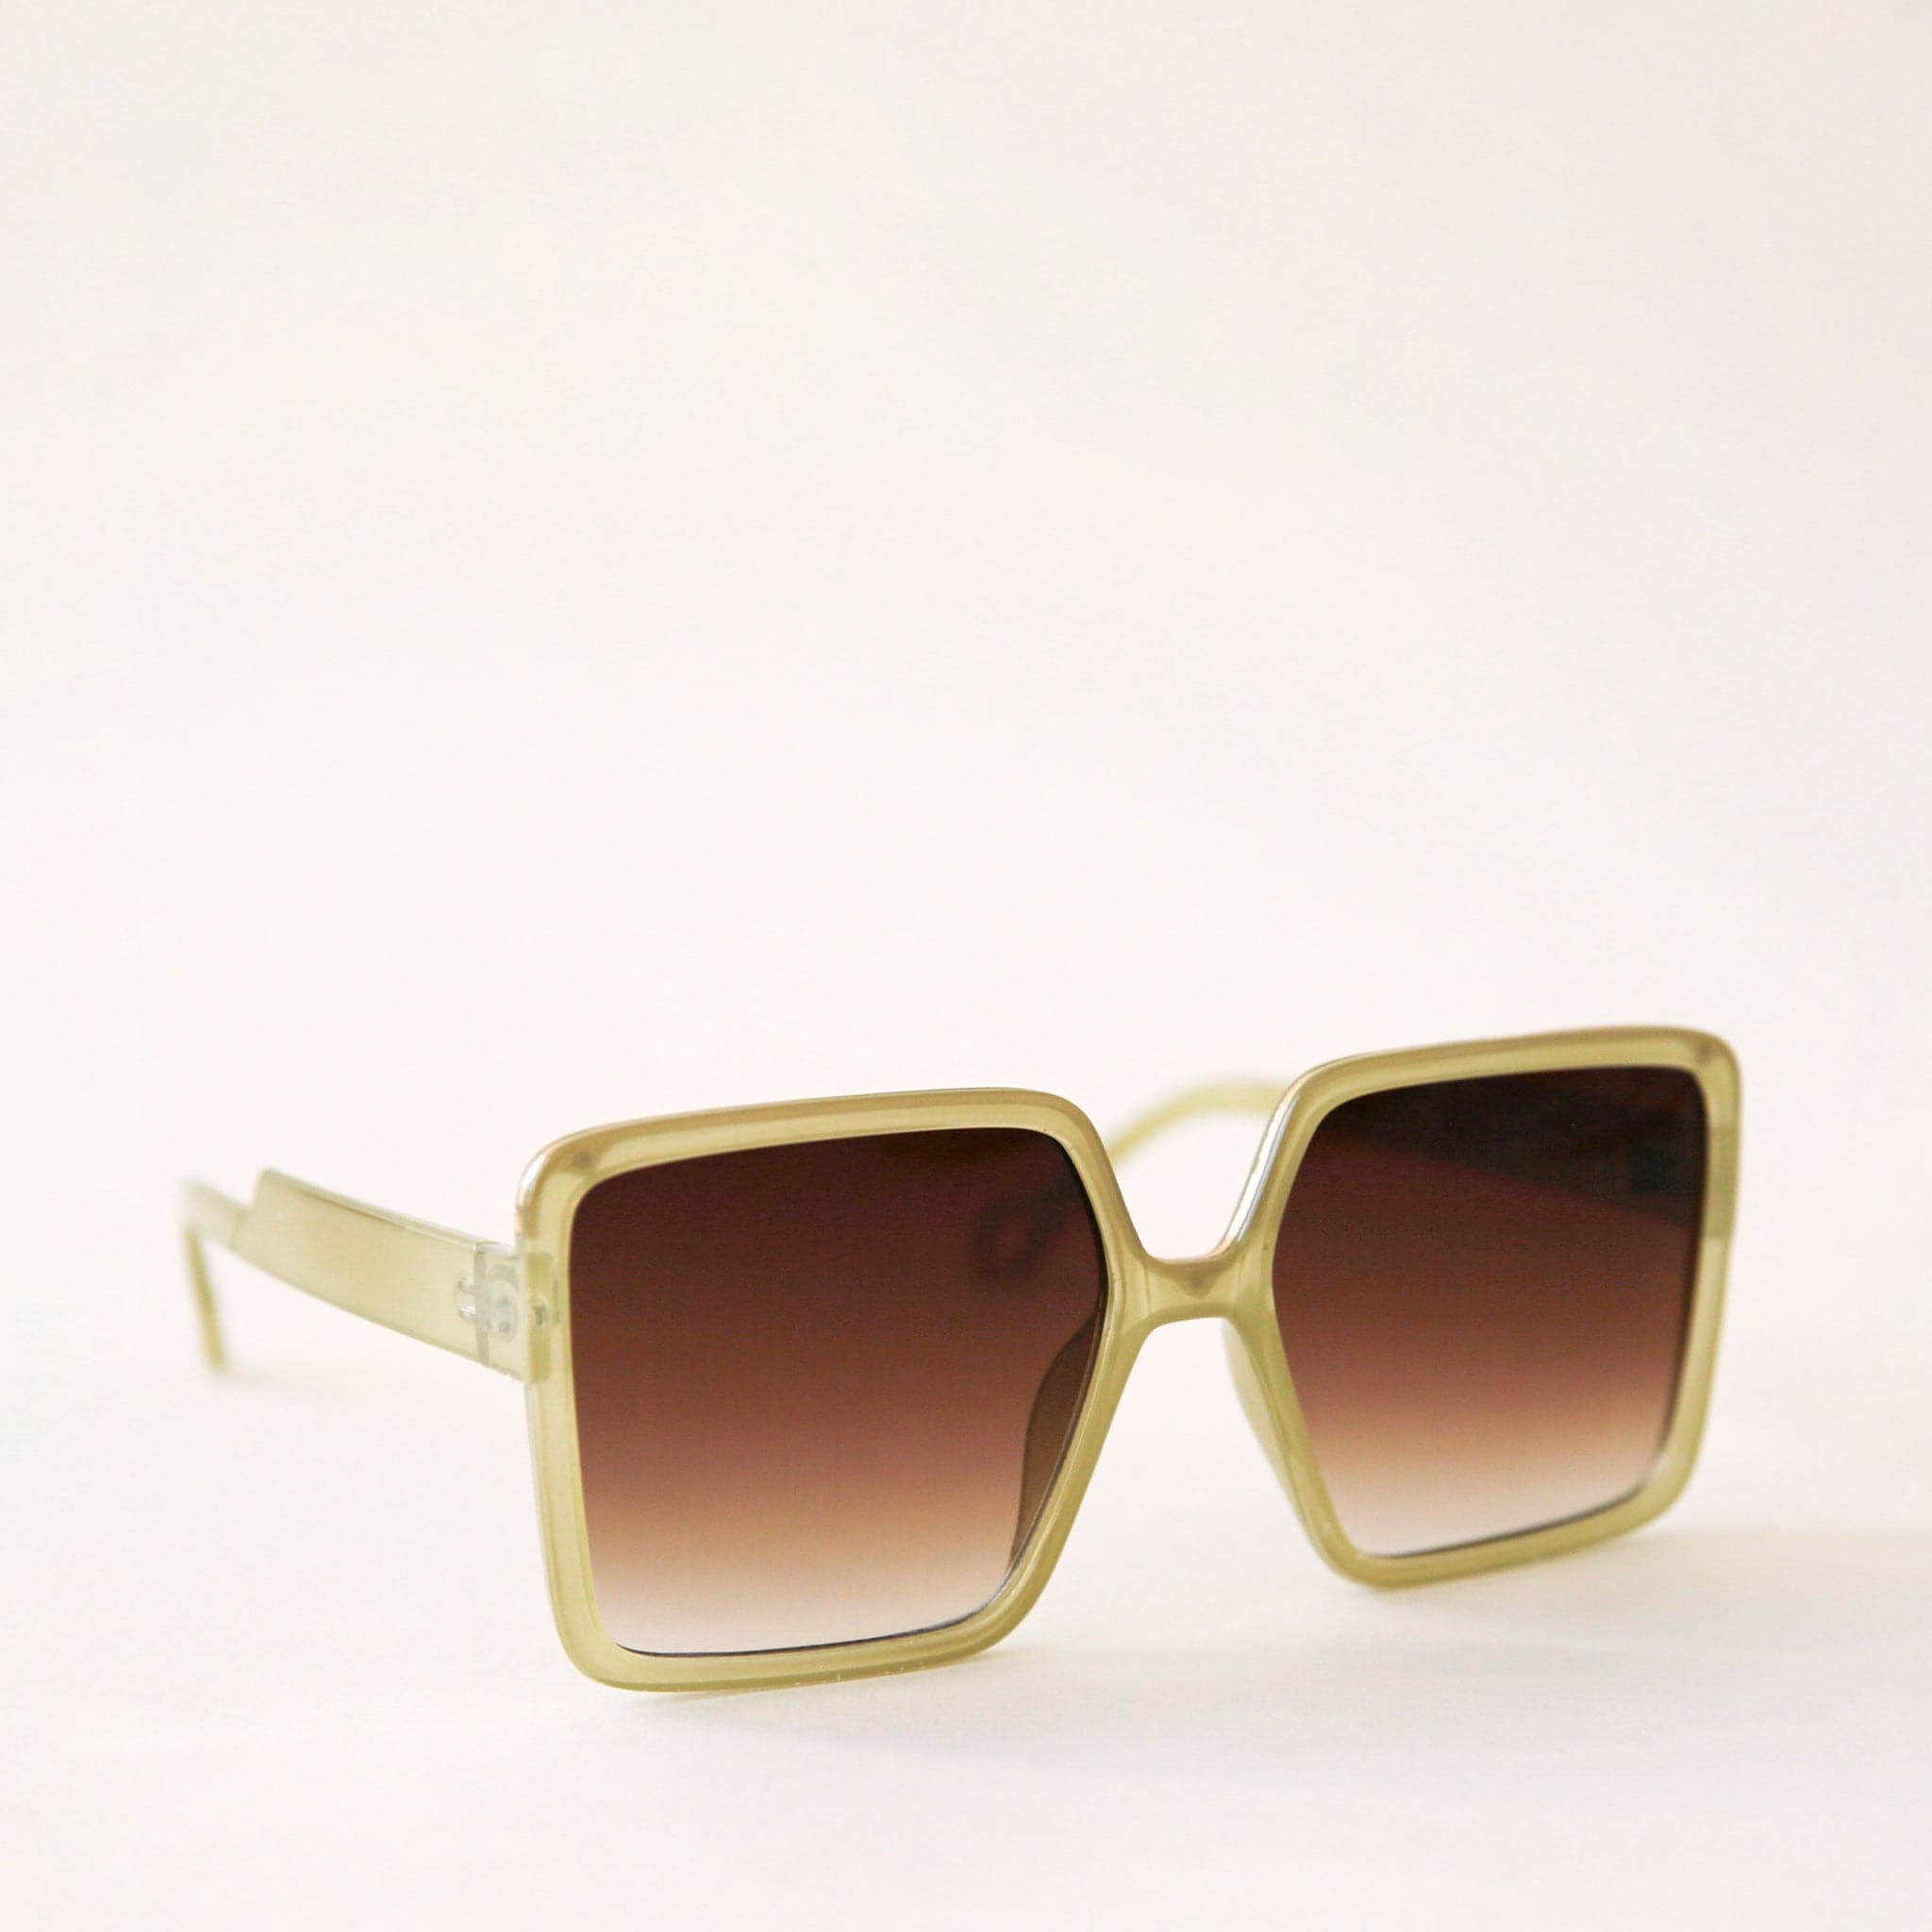 70&#39;s inspired square sunglasses with an olive green frame and a brown lens.